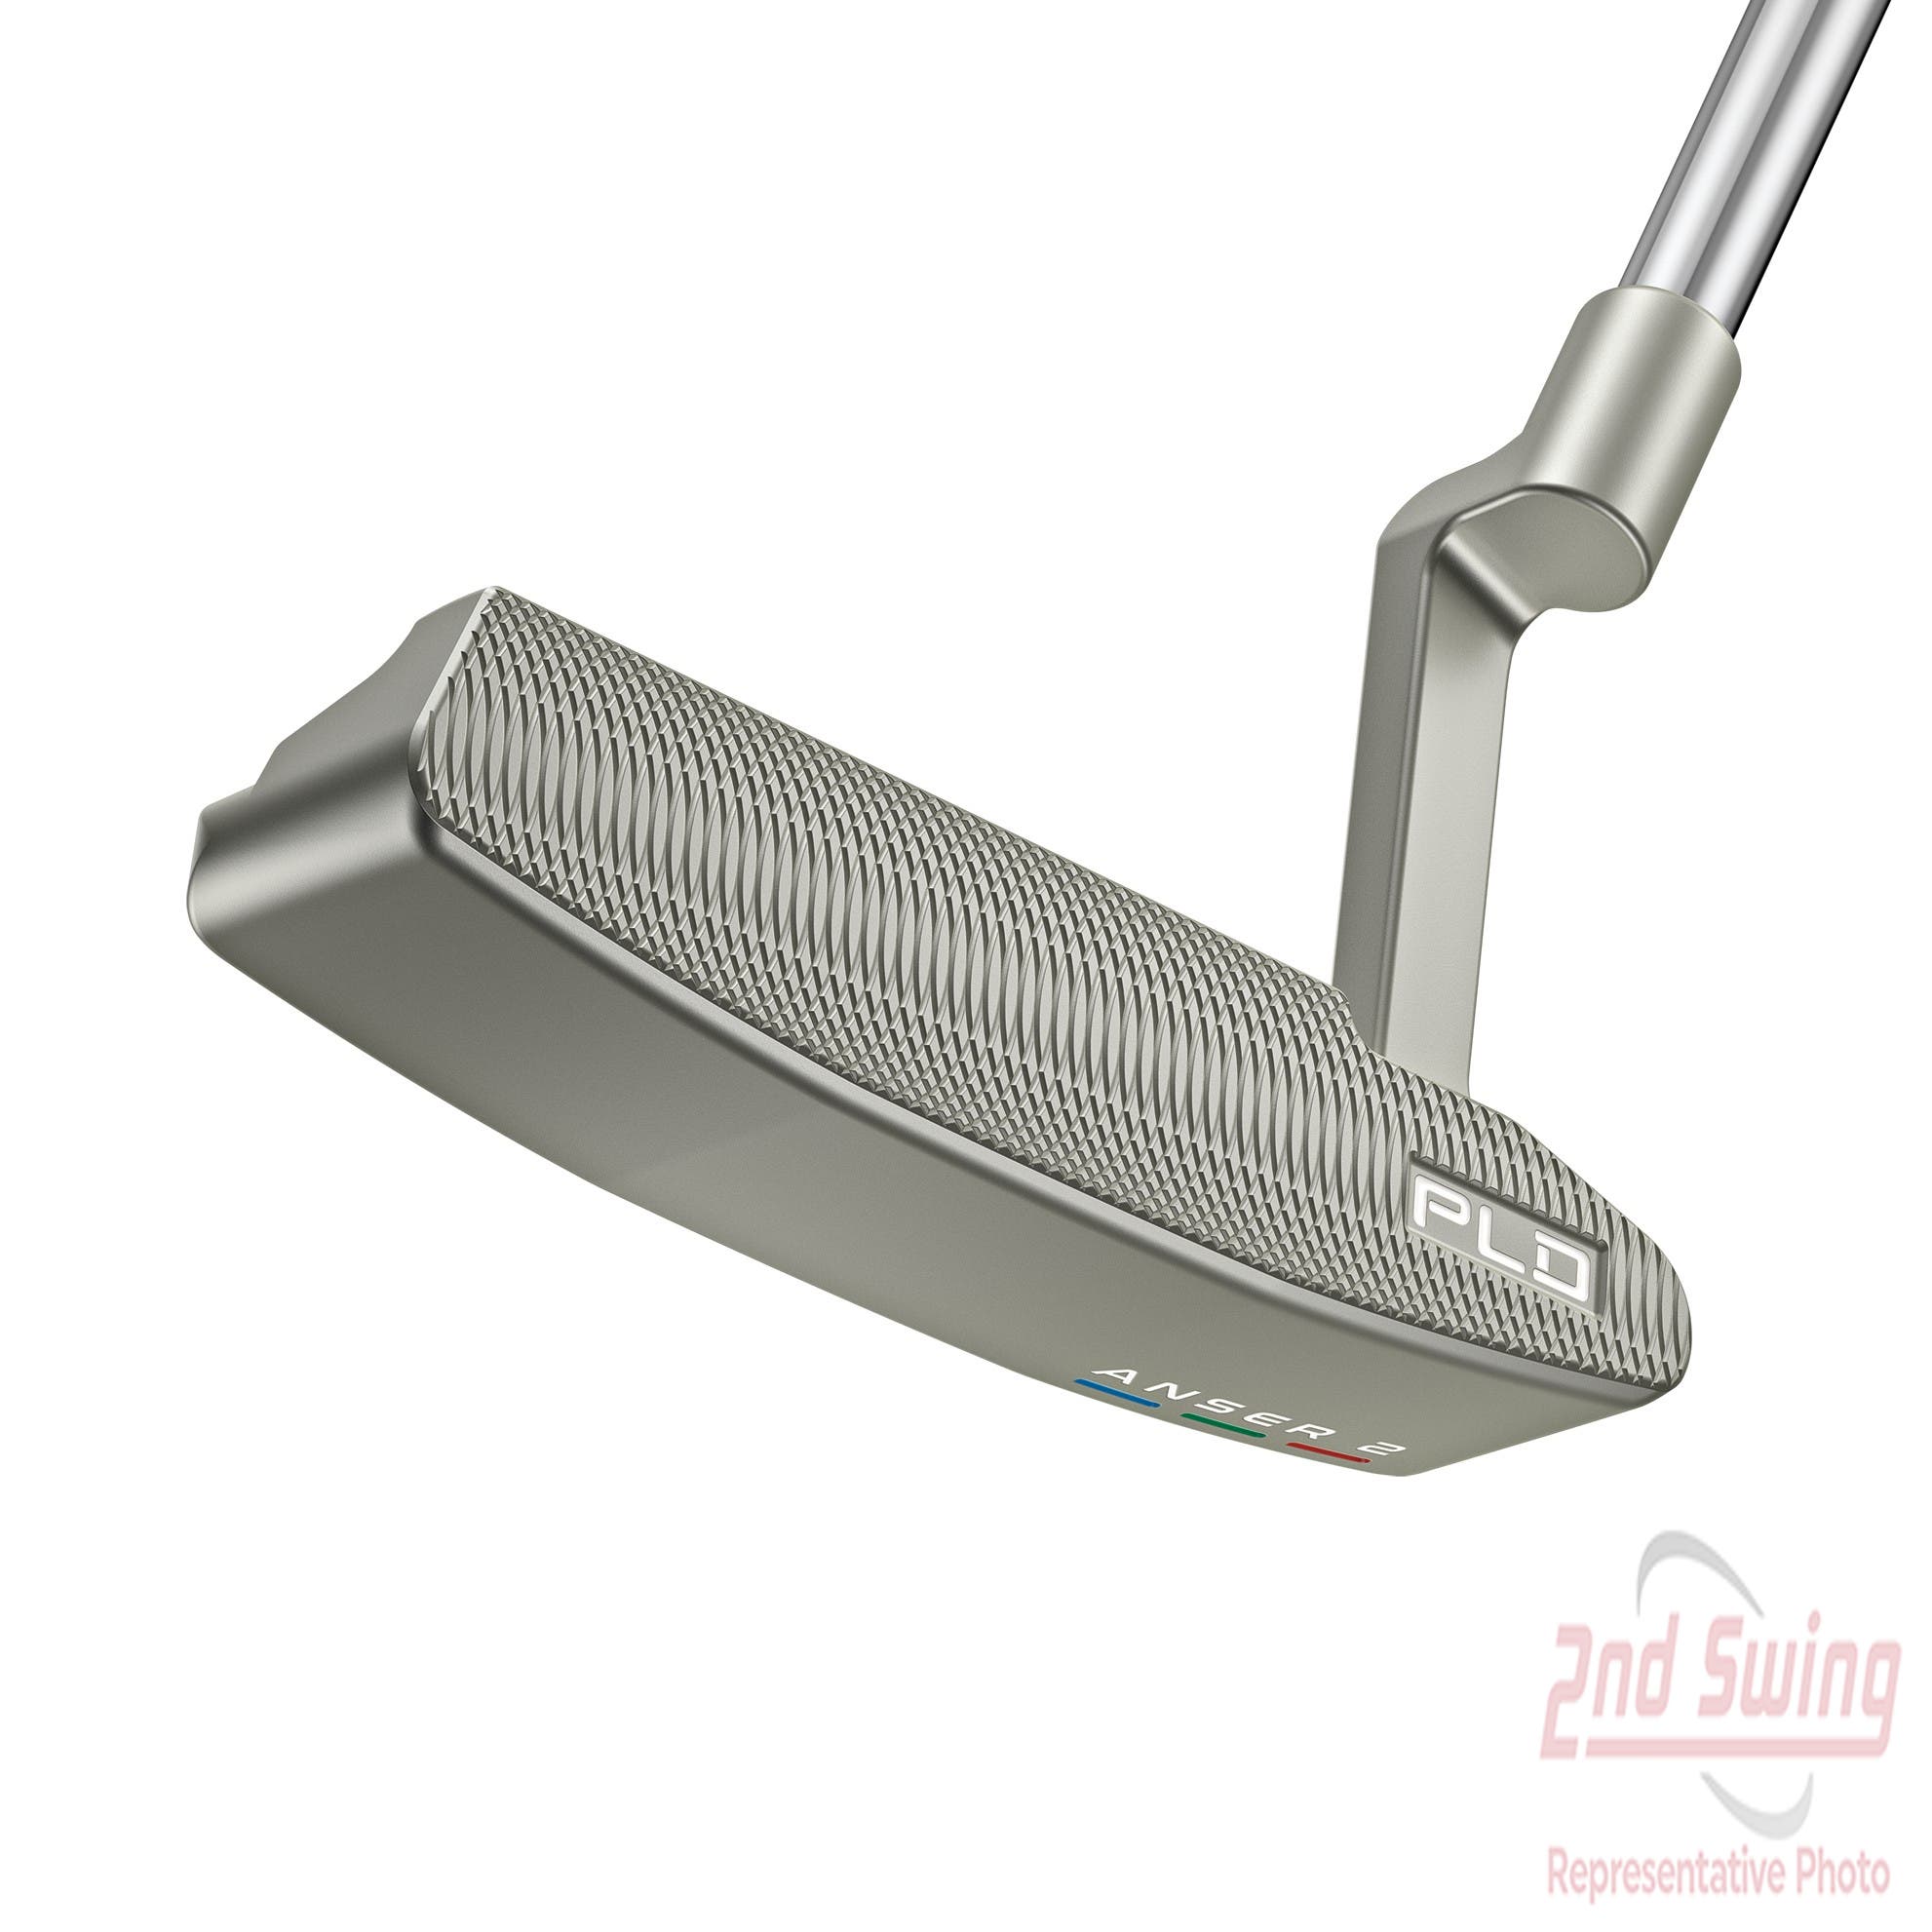 Ping PLD Milled Anser 2 Putter (PLD MIL A2 NEW PUT) 2nd Swing Golf